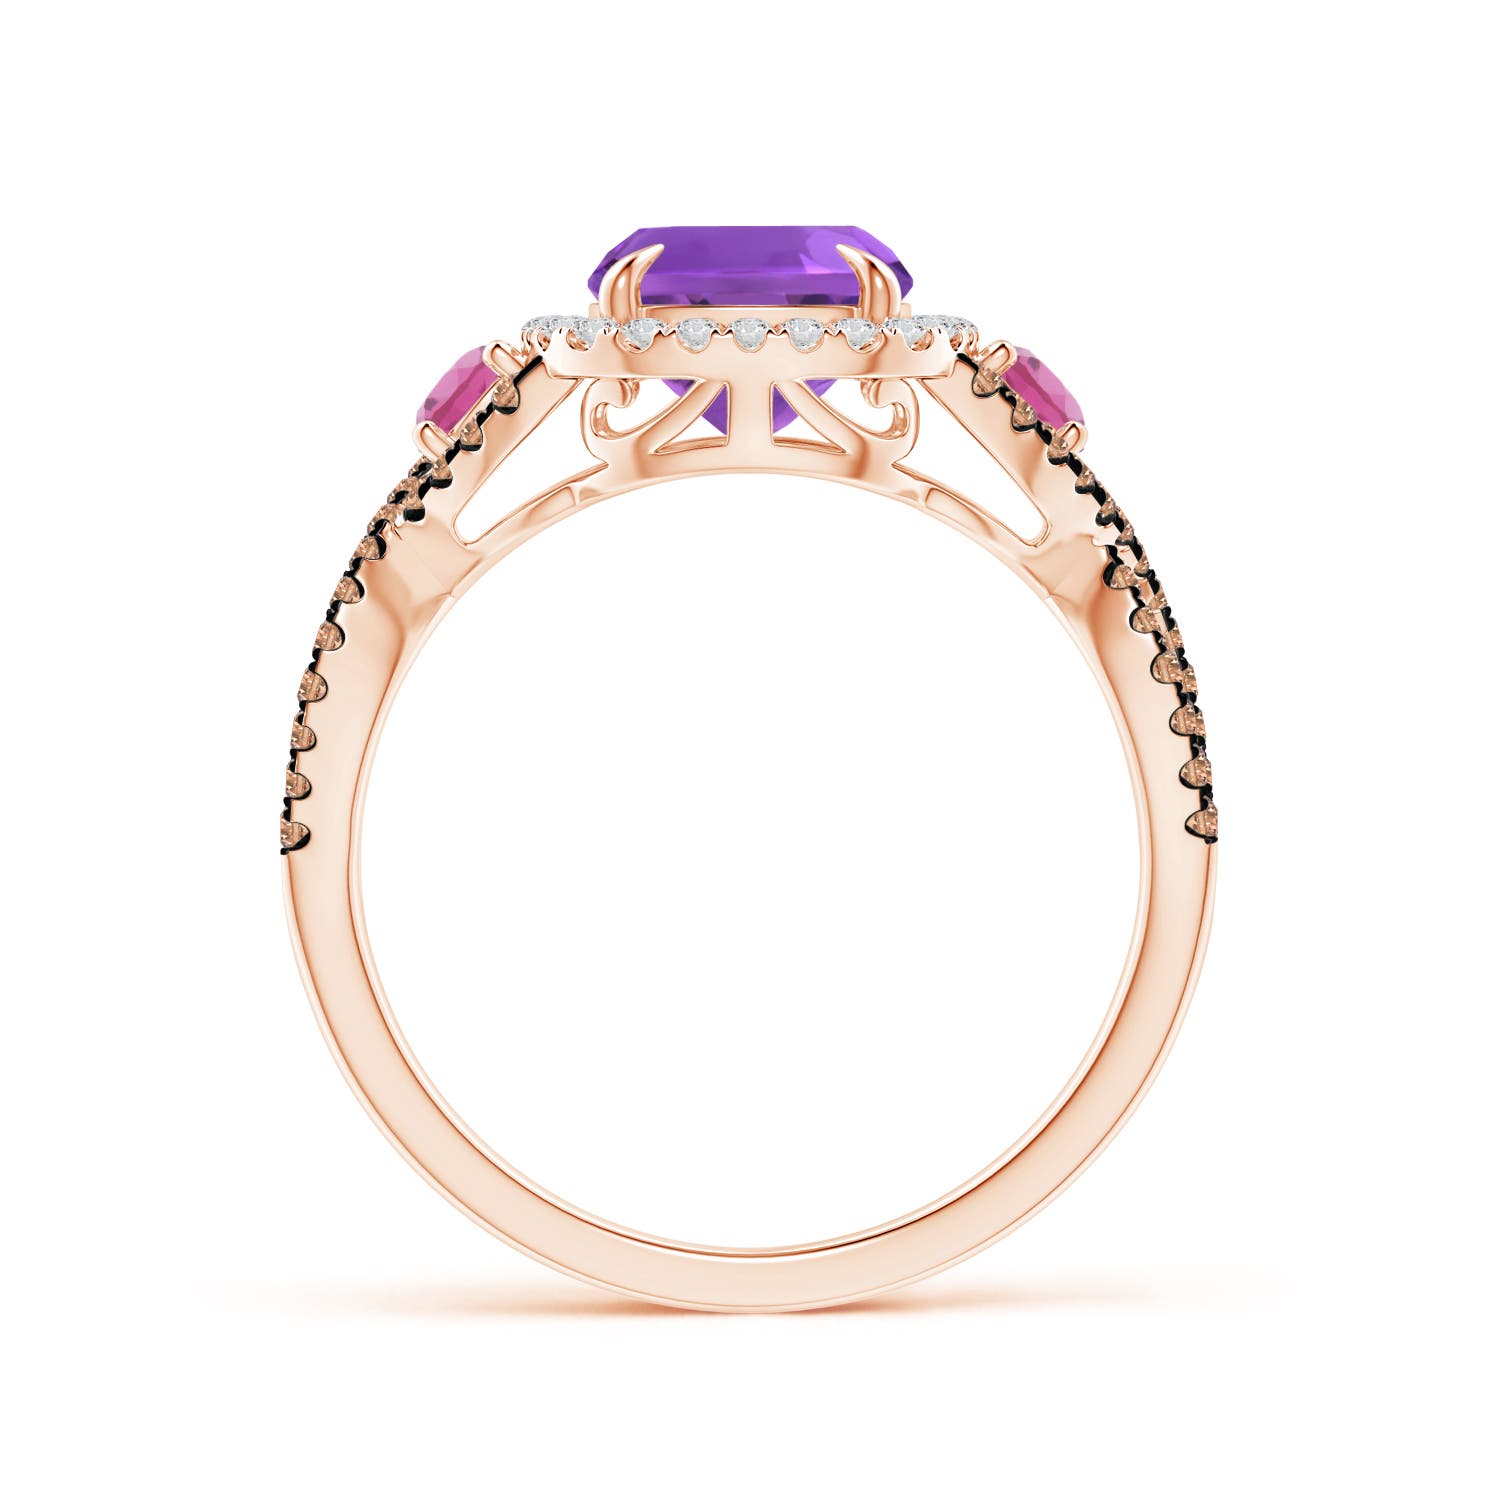 AAA - Amethyst / 2.59 CT / 14 KT Rose Gold